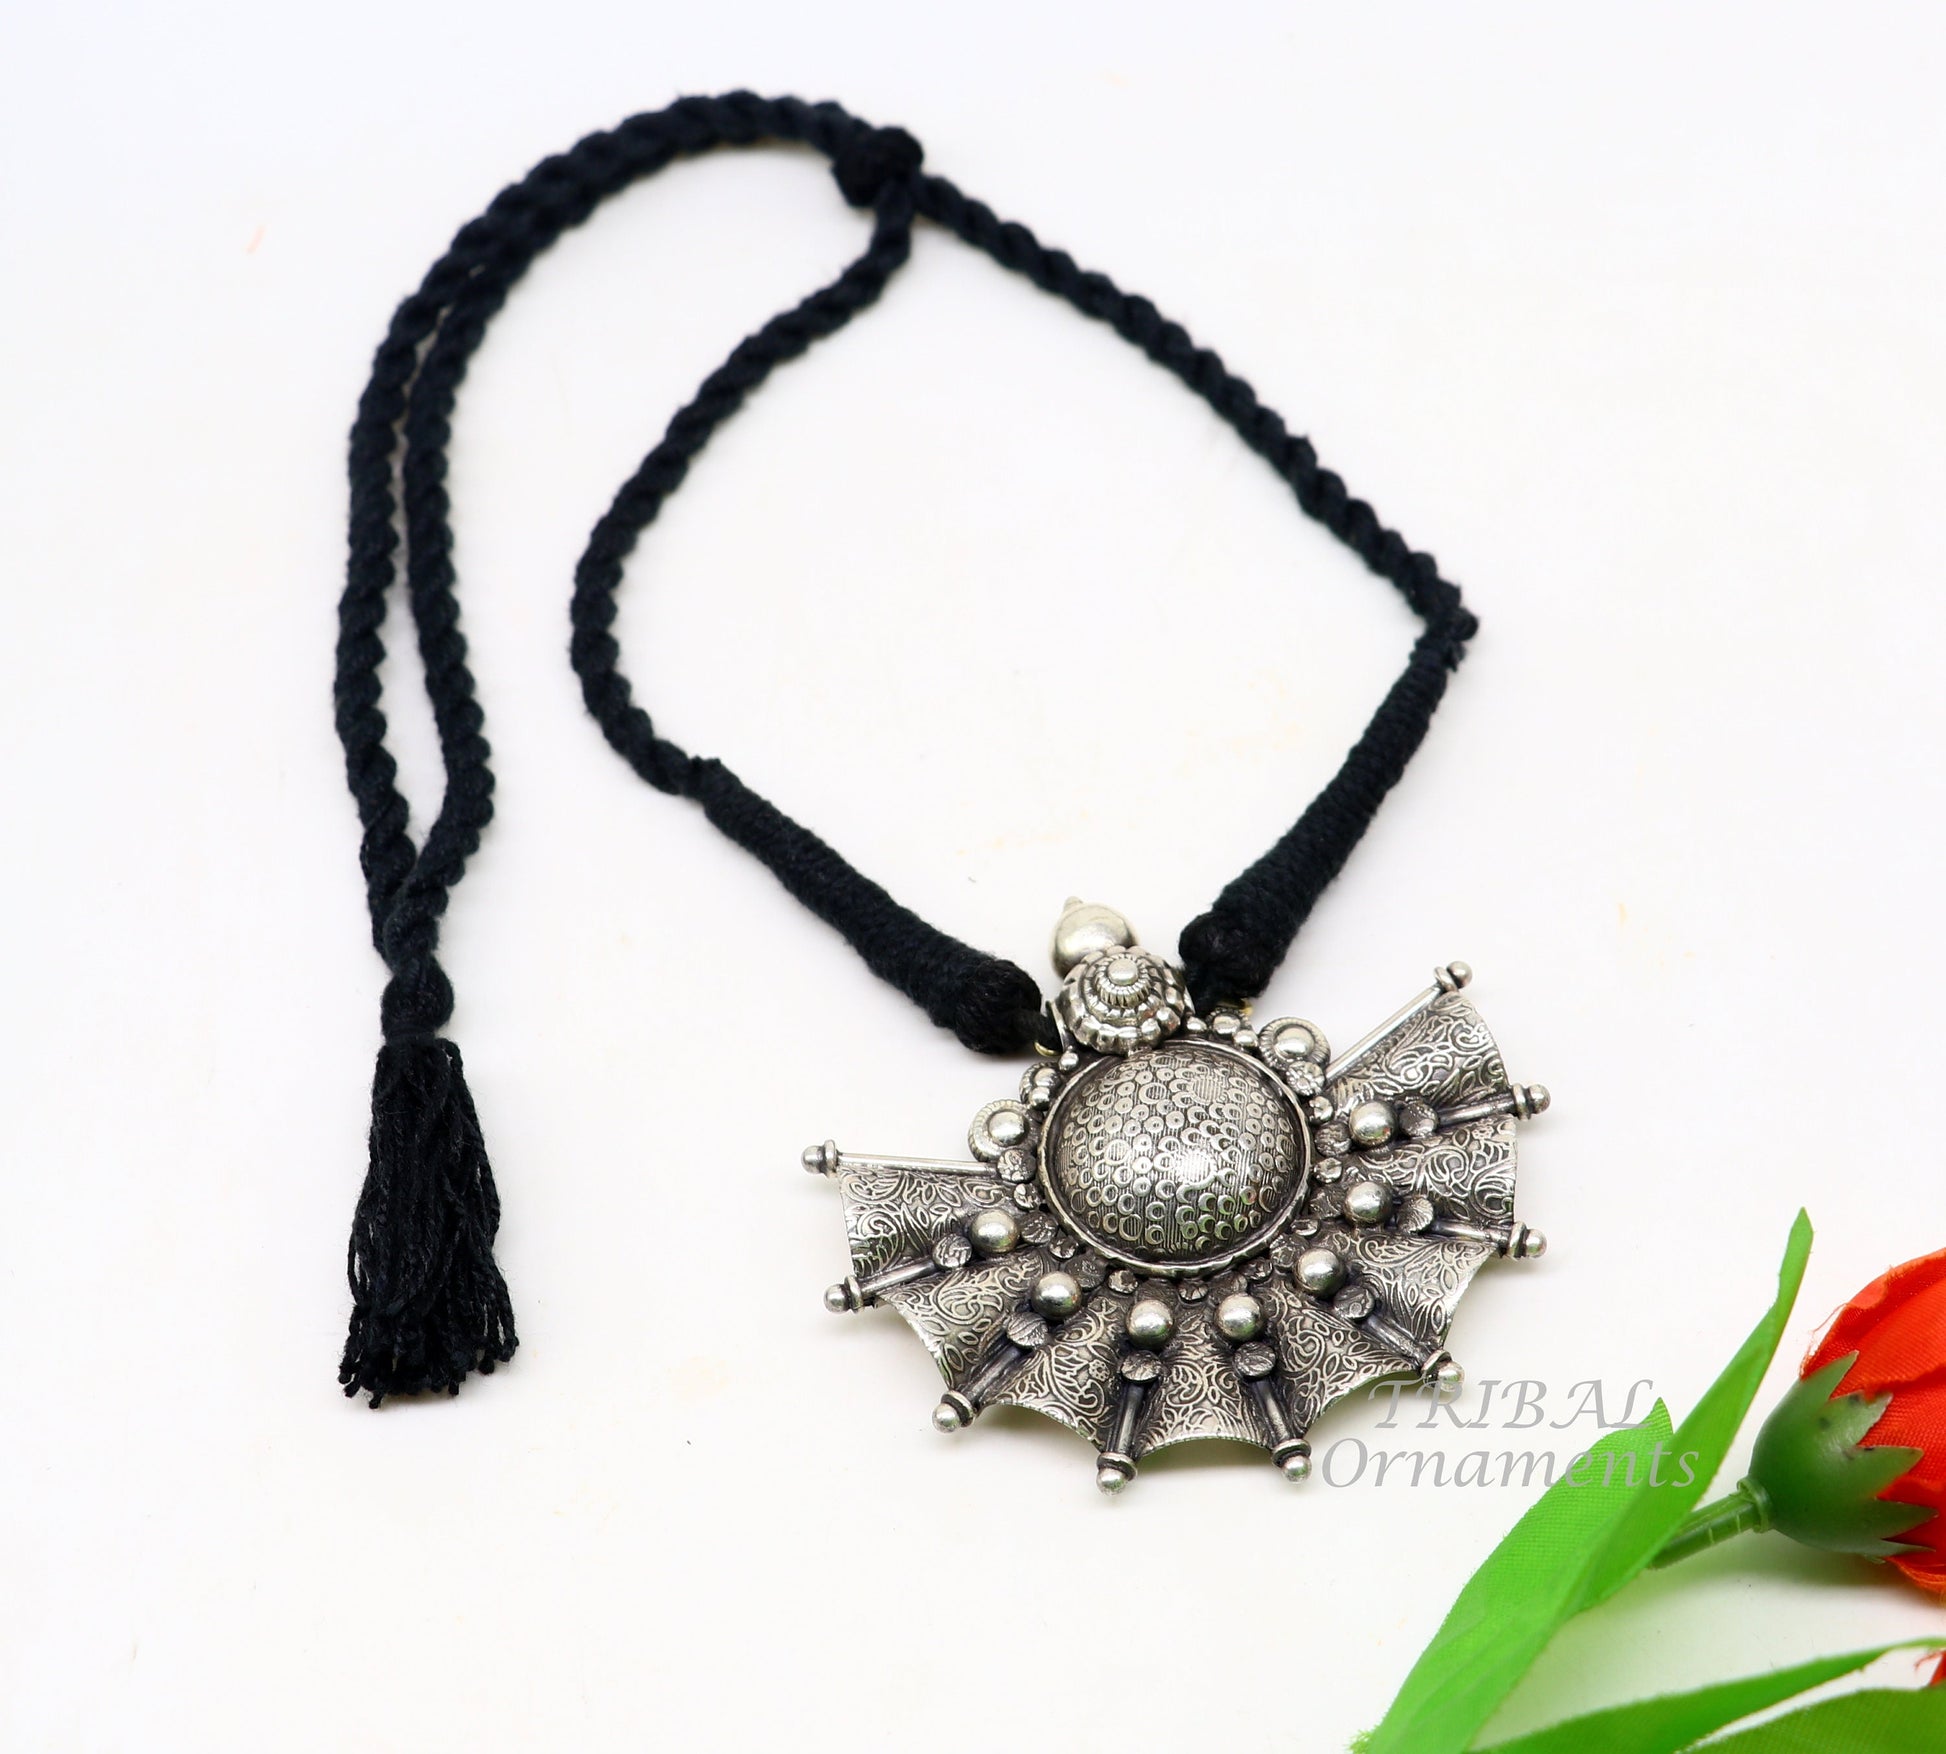 925 sterling silver handmade vintage ethnic style fabulous unique design pendant necklace best belly dance ethnic garba jewelry nsp506 - TRIBAL ORNAMENTS